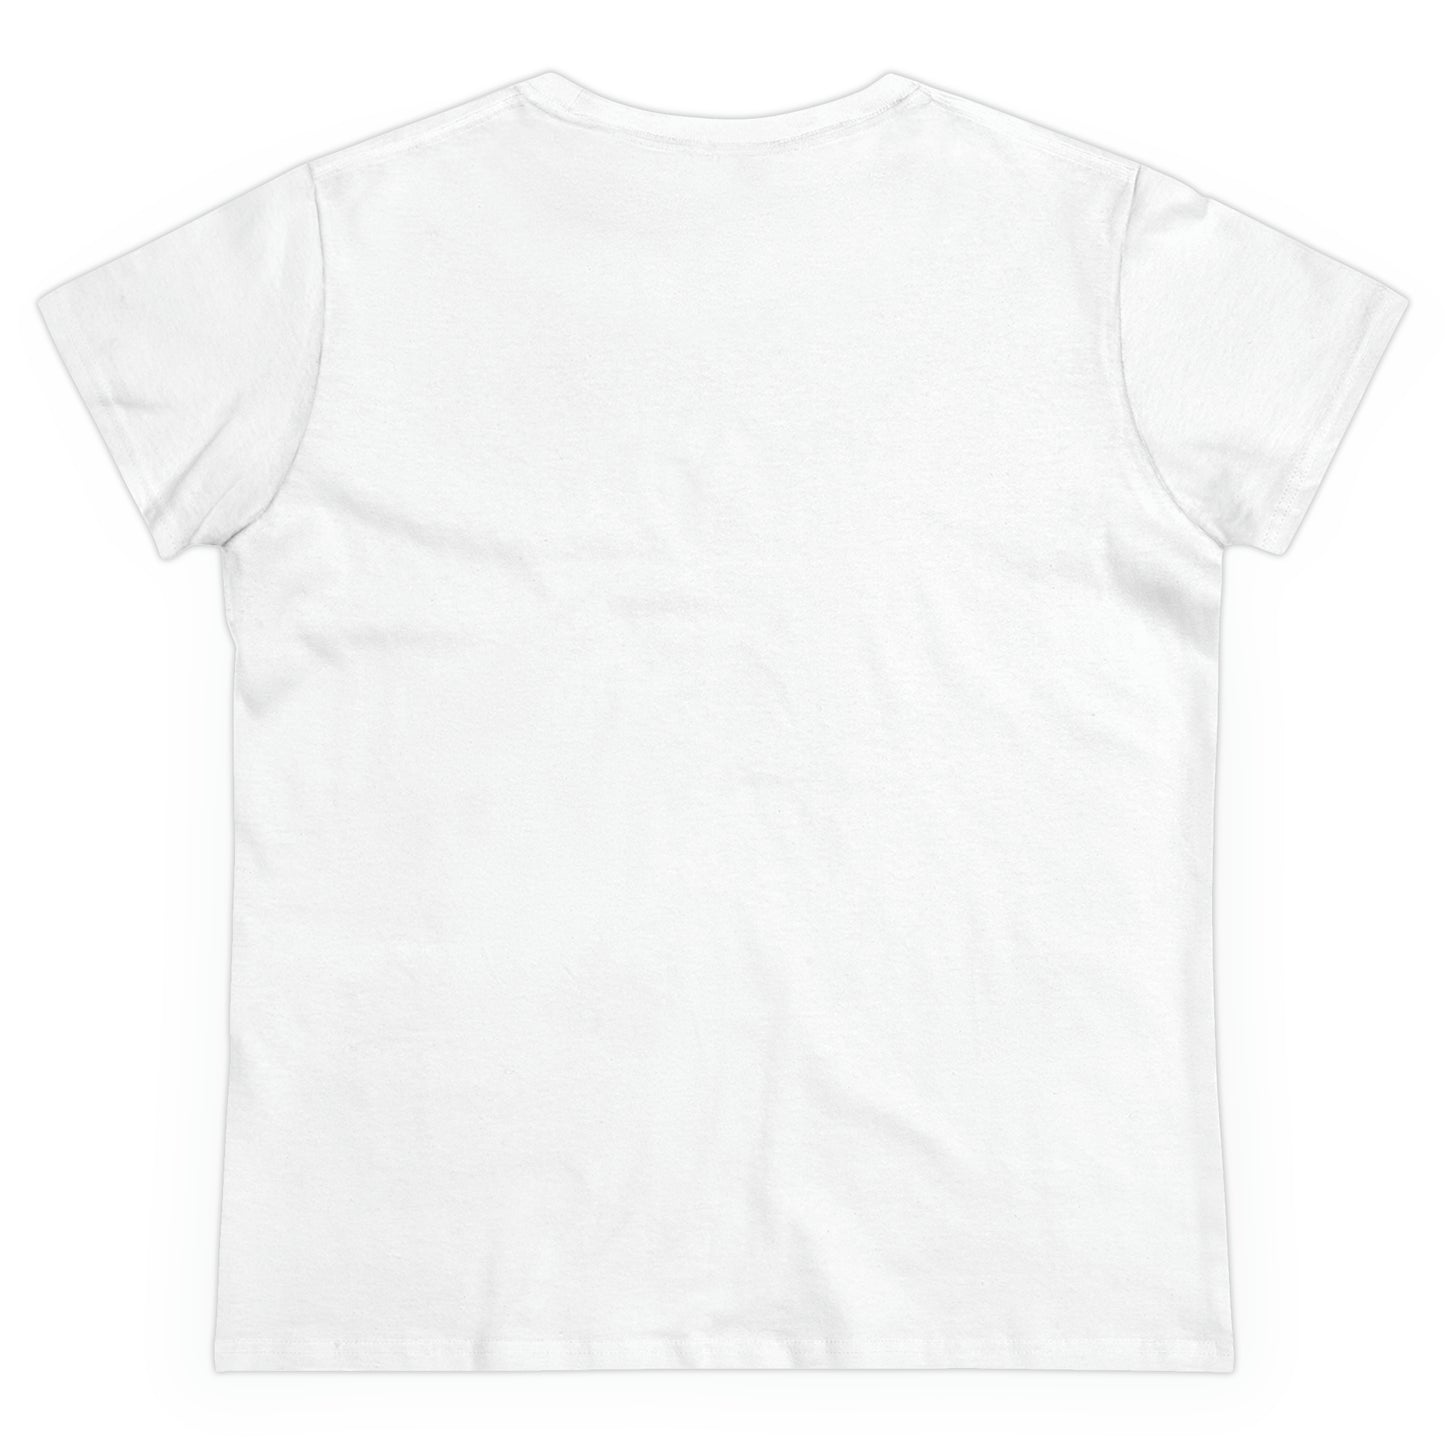 Rise Biscuit Doll T-Shirt - White